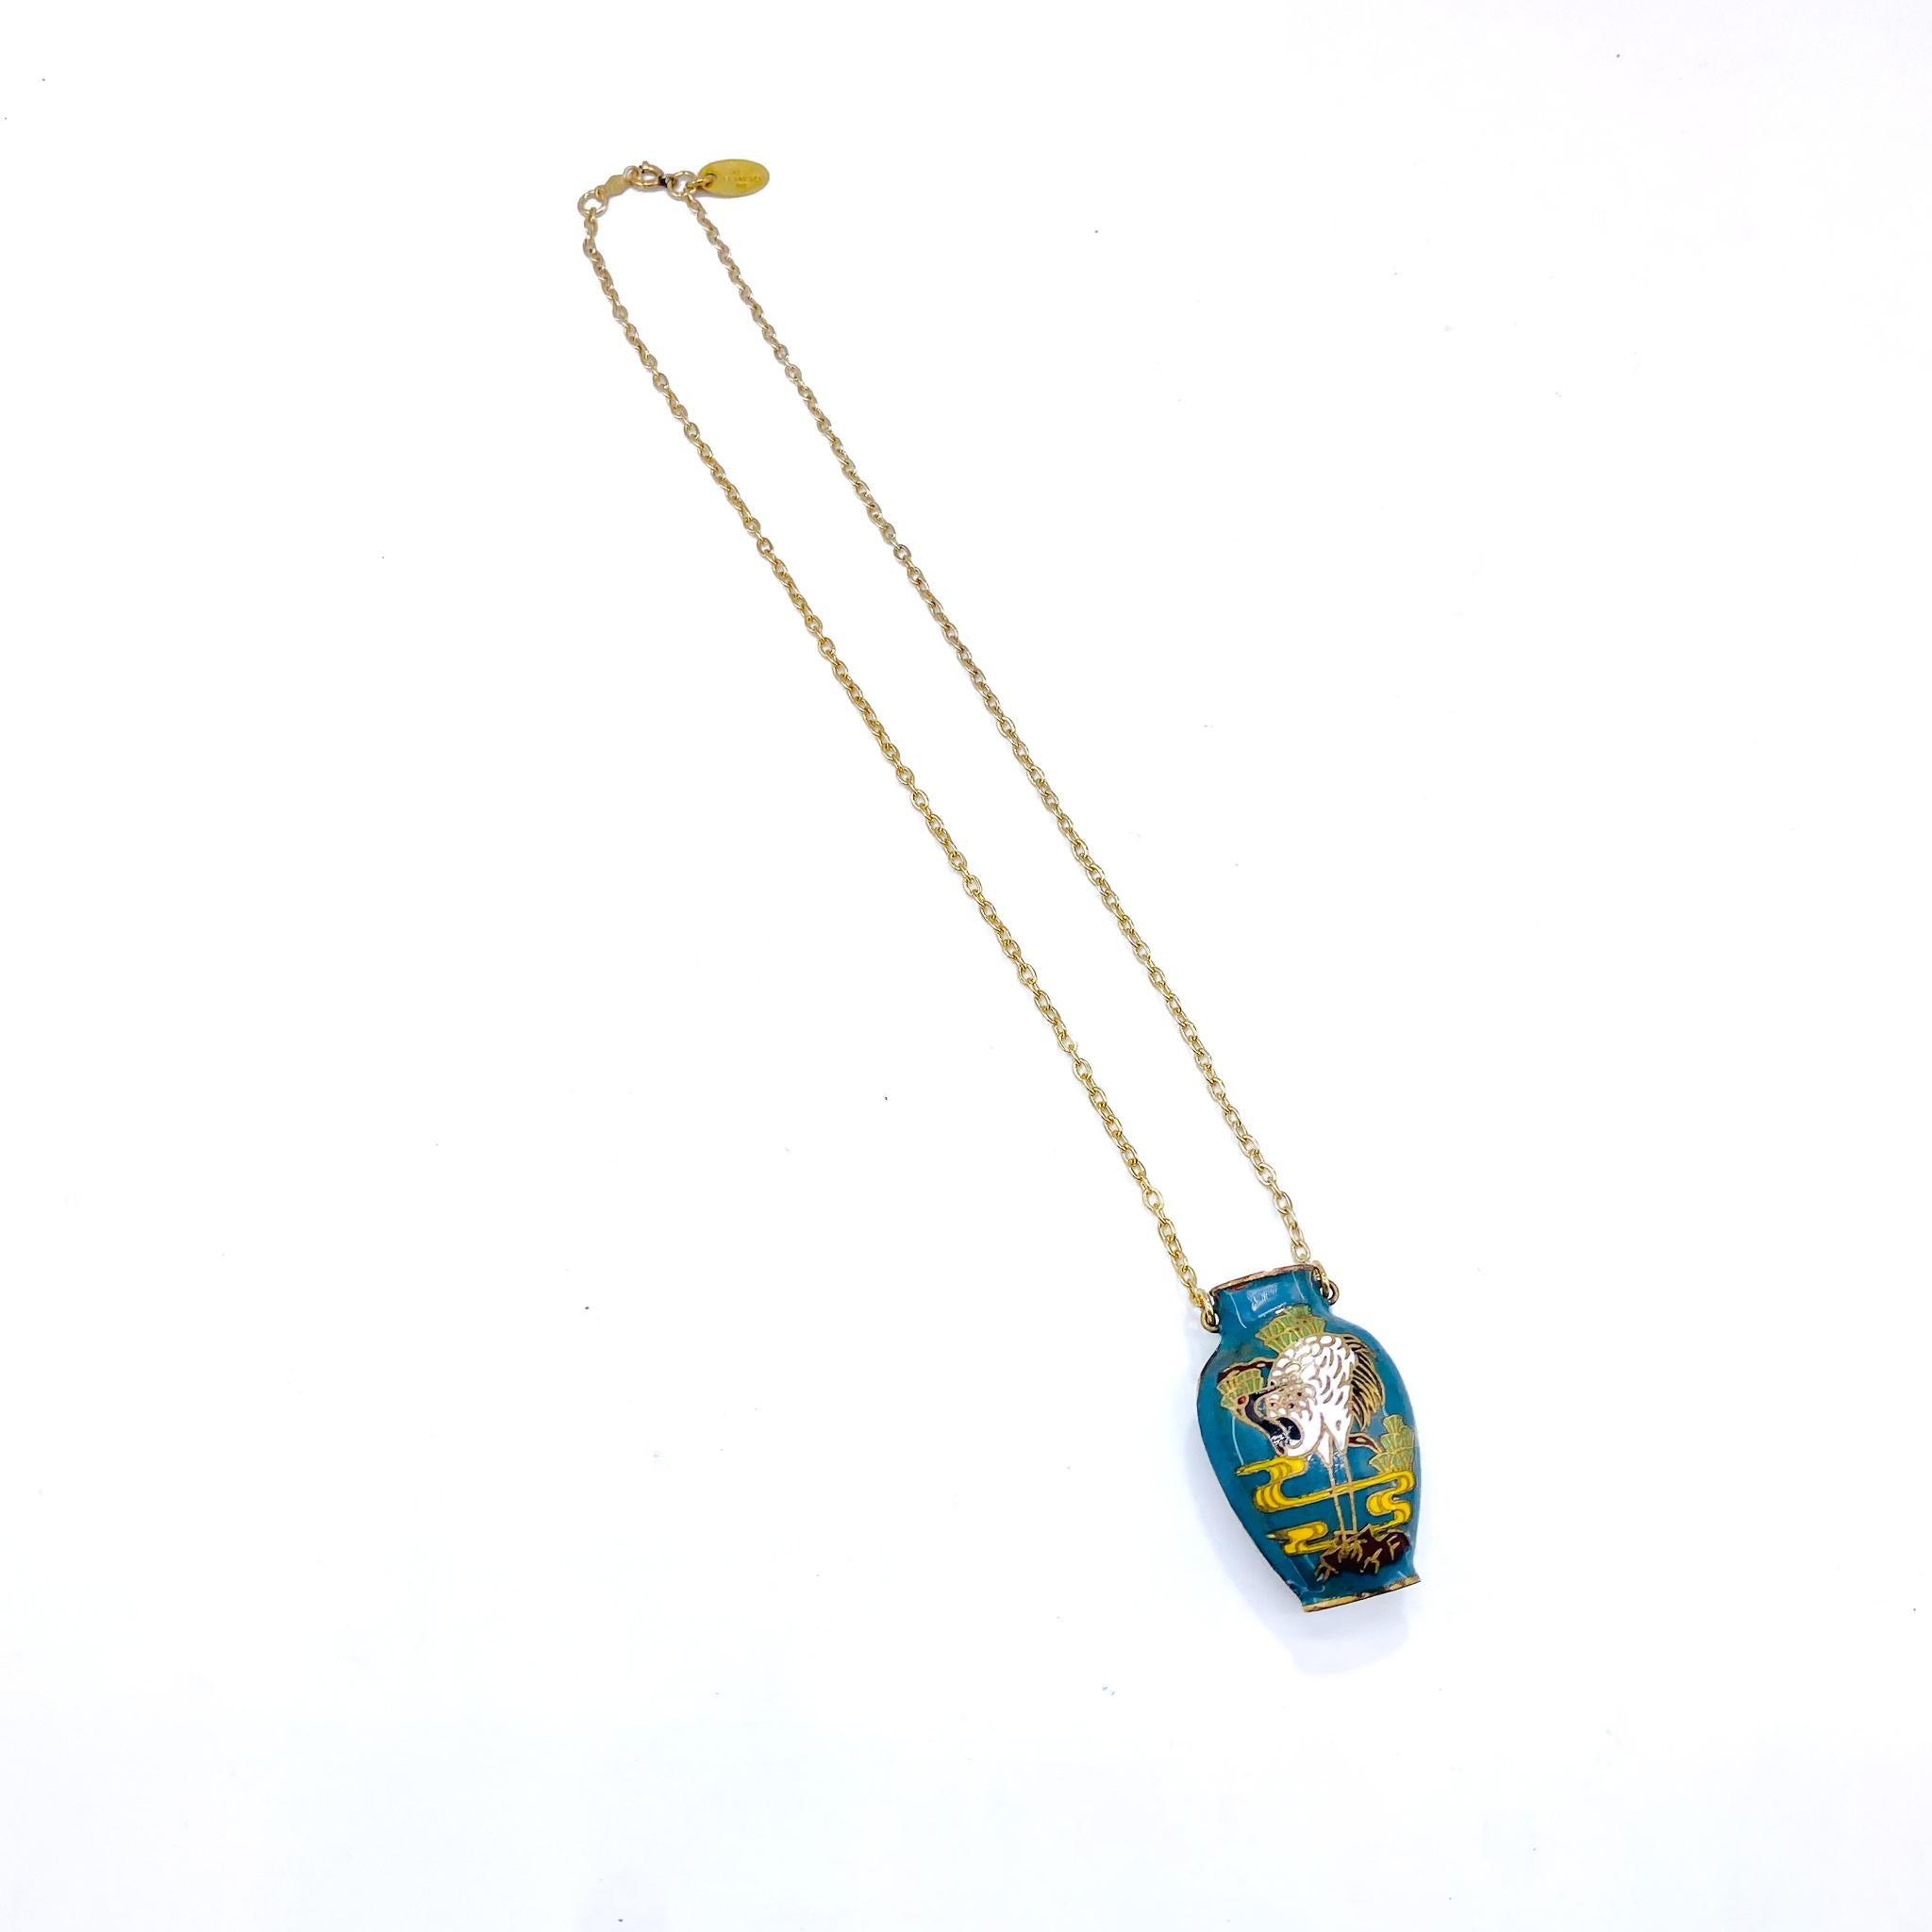 Vintage Les Bernard 1980s Pendant Necklace In Excellent Condition For Sale In London, GB